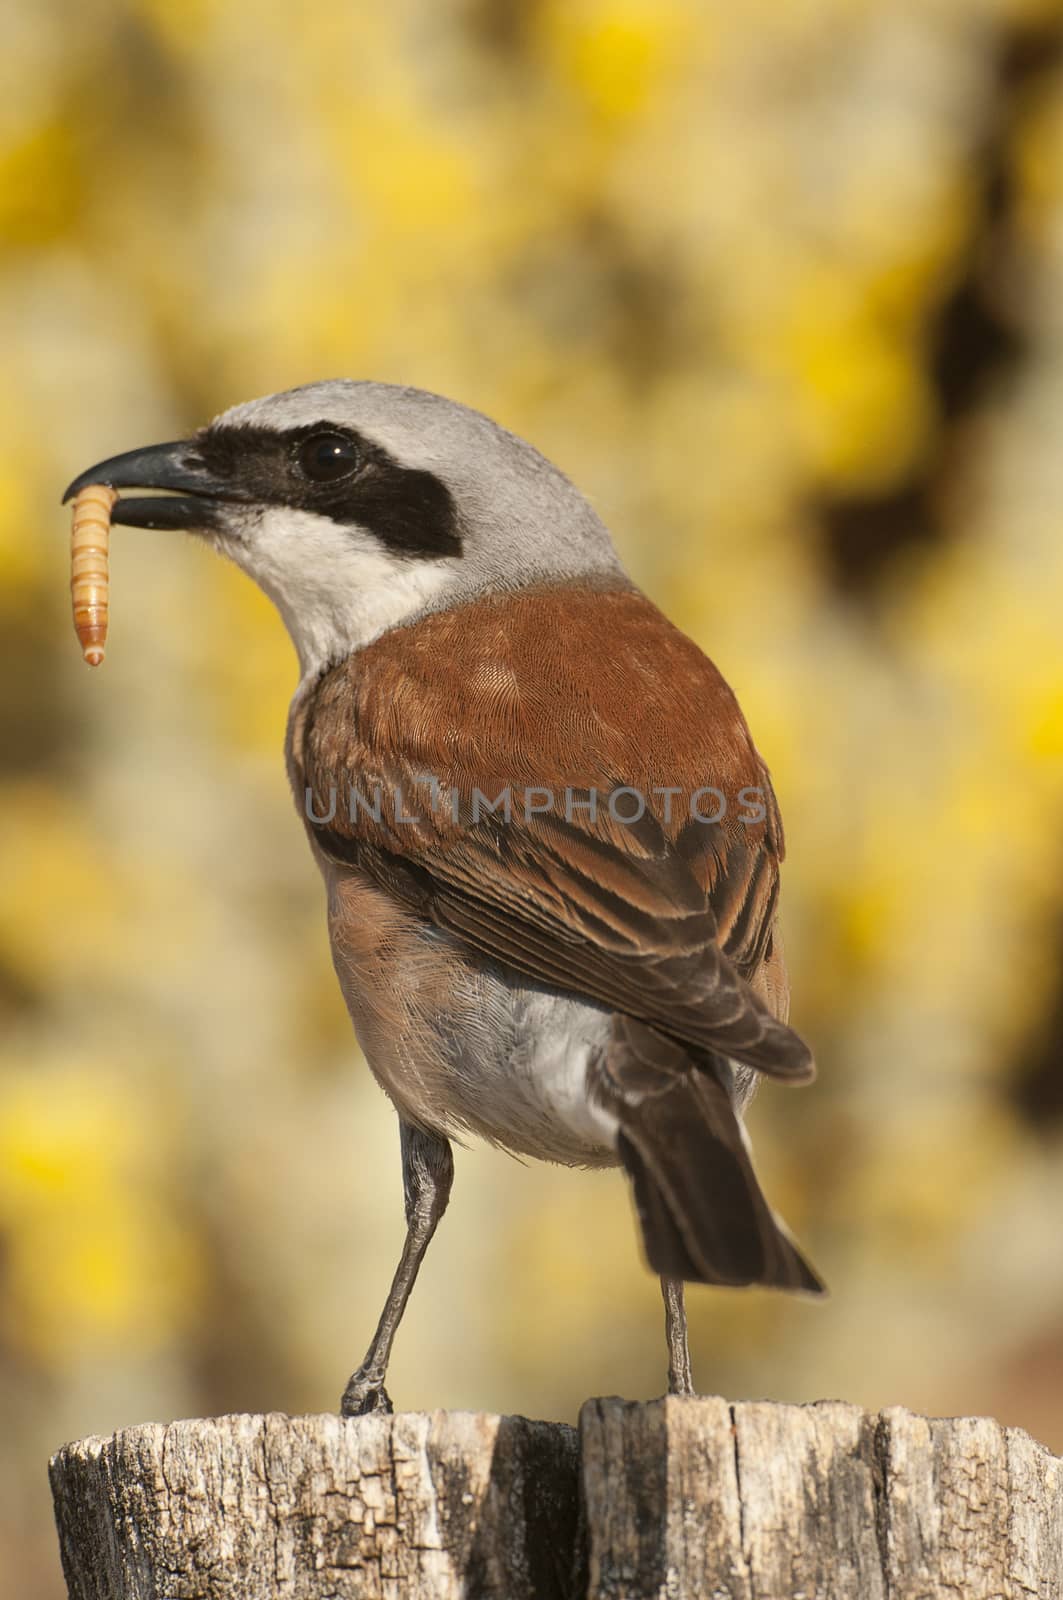 Red-backed shrike male. Lanius collurio, with yellow background  by jalonsohu@gmail.com